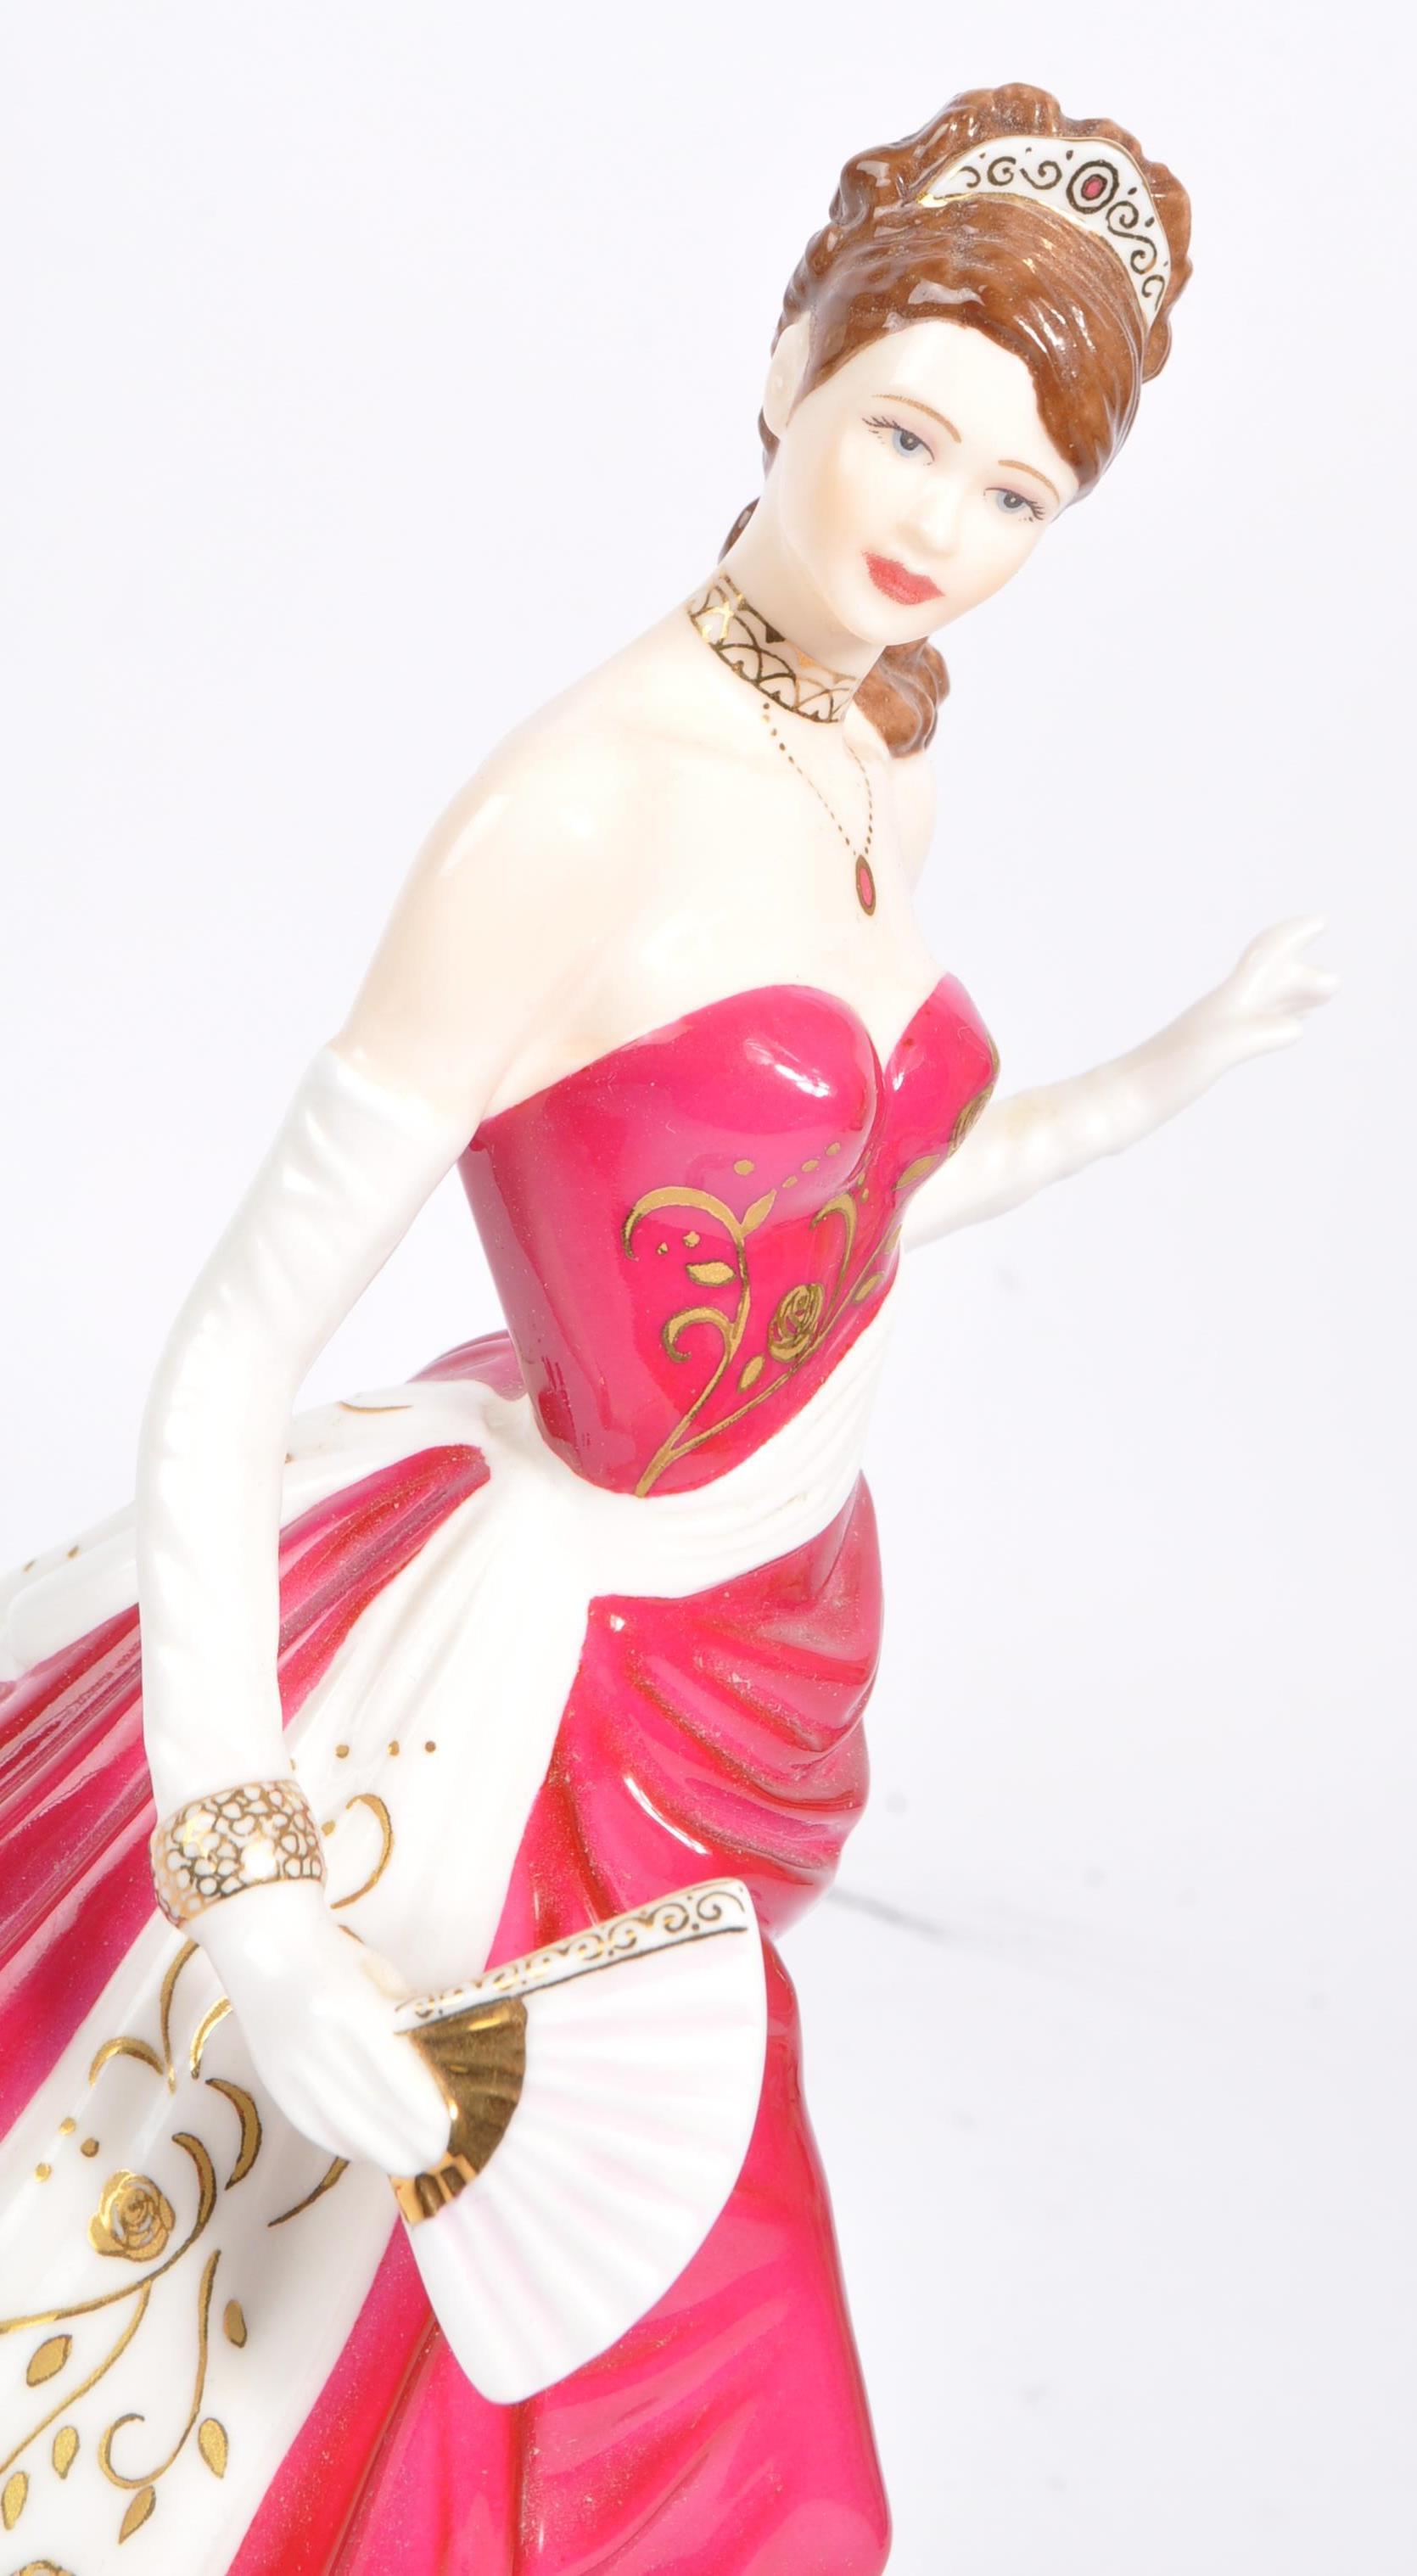 LIMITED EDITION ROYAL WORCESTER RUBY BONE CHINA FIGURINE - Image 2 of 5